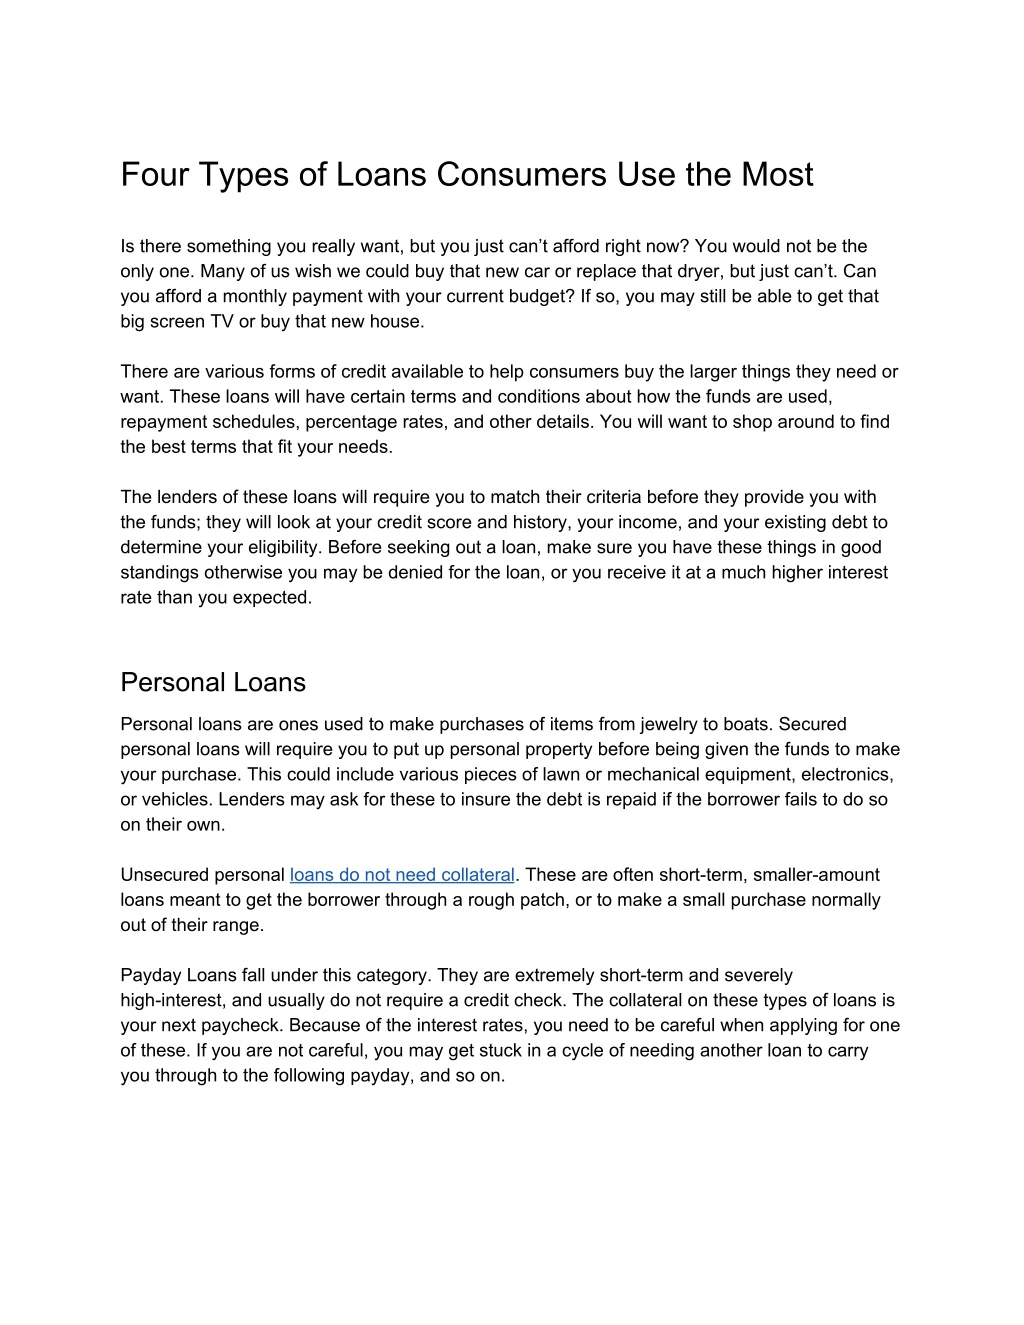 four types of loans consumers use the most